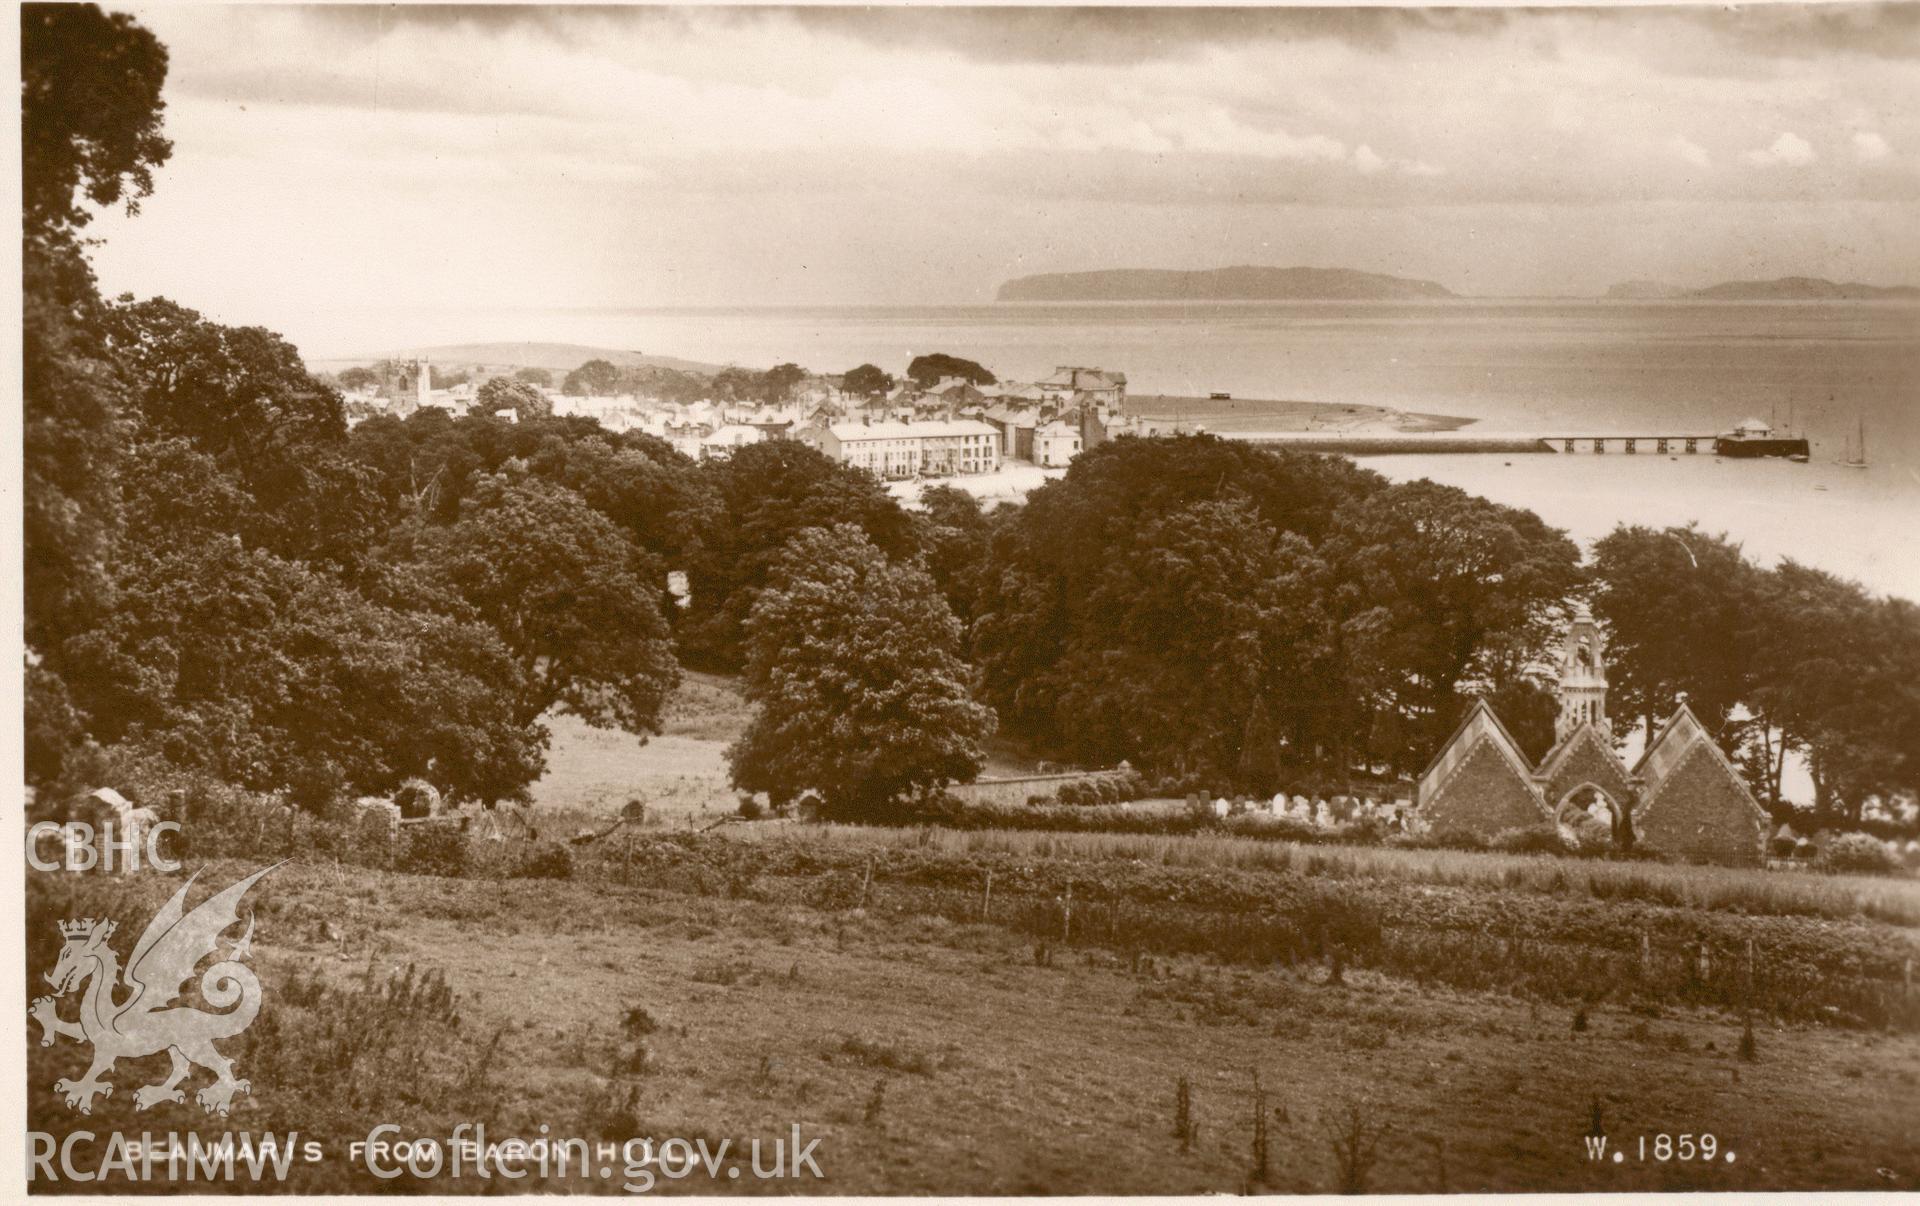 Digitised postcard image of view of Beaumaris town from Baron Hill, F. Frith and Co. Ltd. Produced by Parks and Gardens Data Services, from an original item in the Peter Davis Collection at Parks and Gardens UK. We hold only web-resolution images of this collection, suitable for viewing on screen and for research purposes only. We do not hold the original images, or publication quality scans.